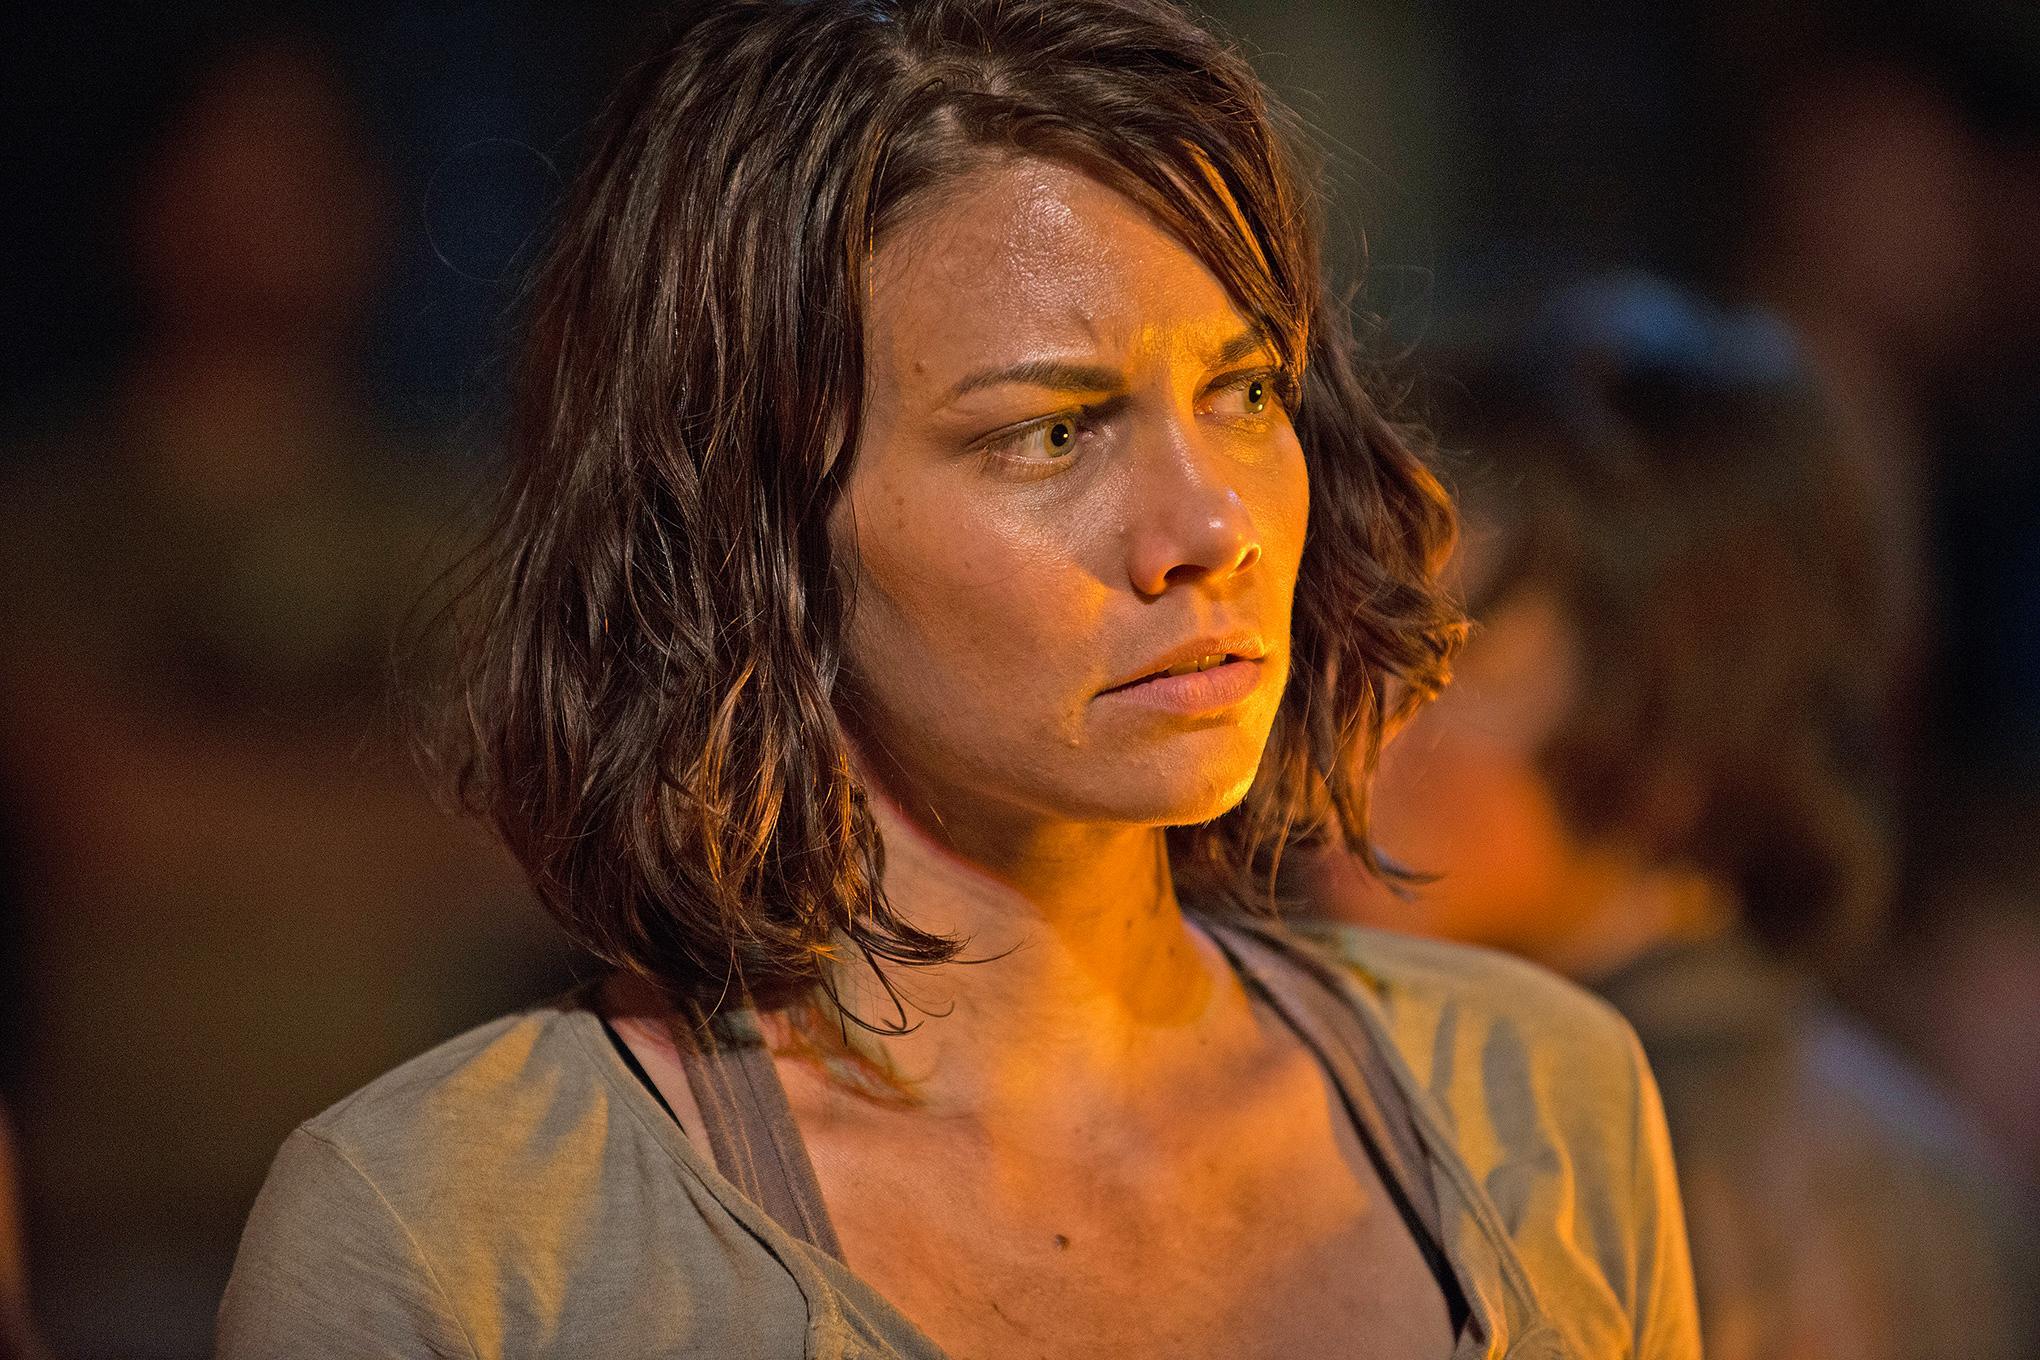 The Walking Deads Lauren Cohan Id Rather Have The Validation Of 2397